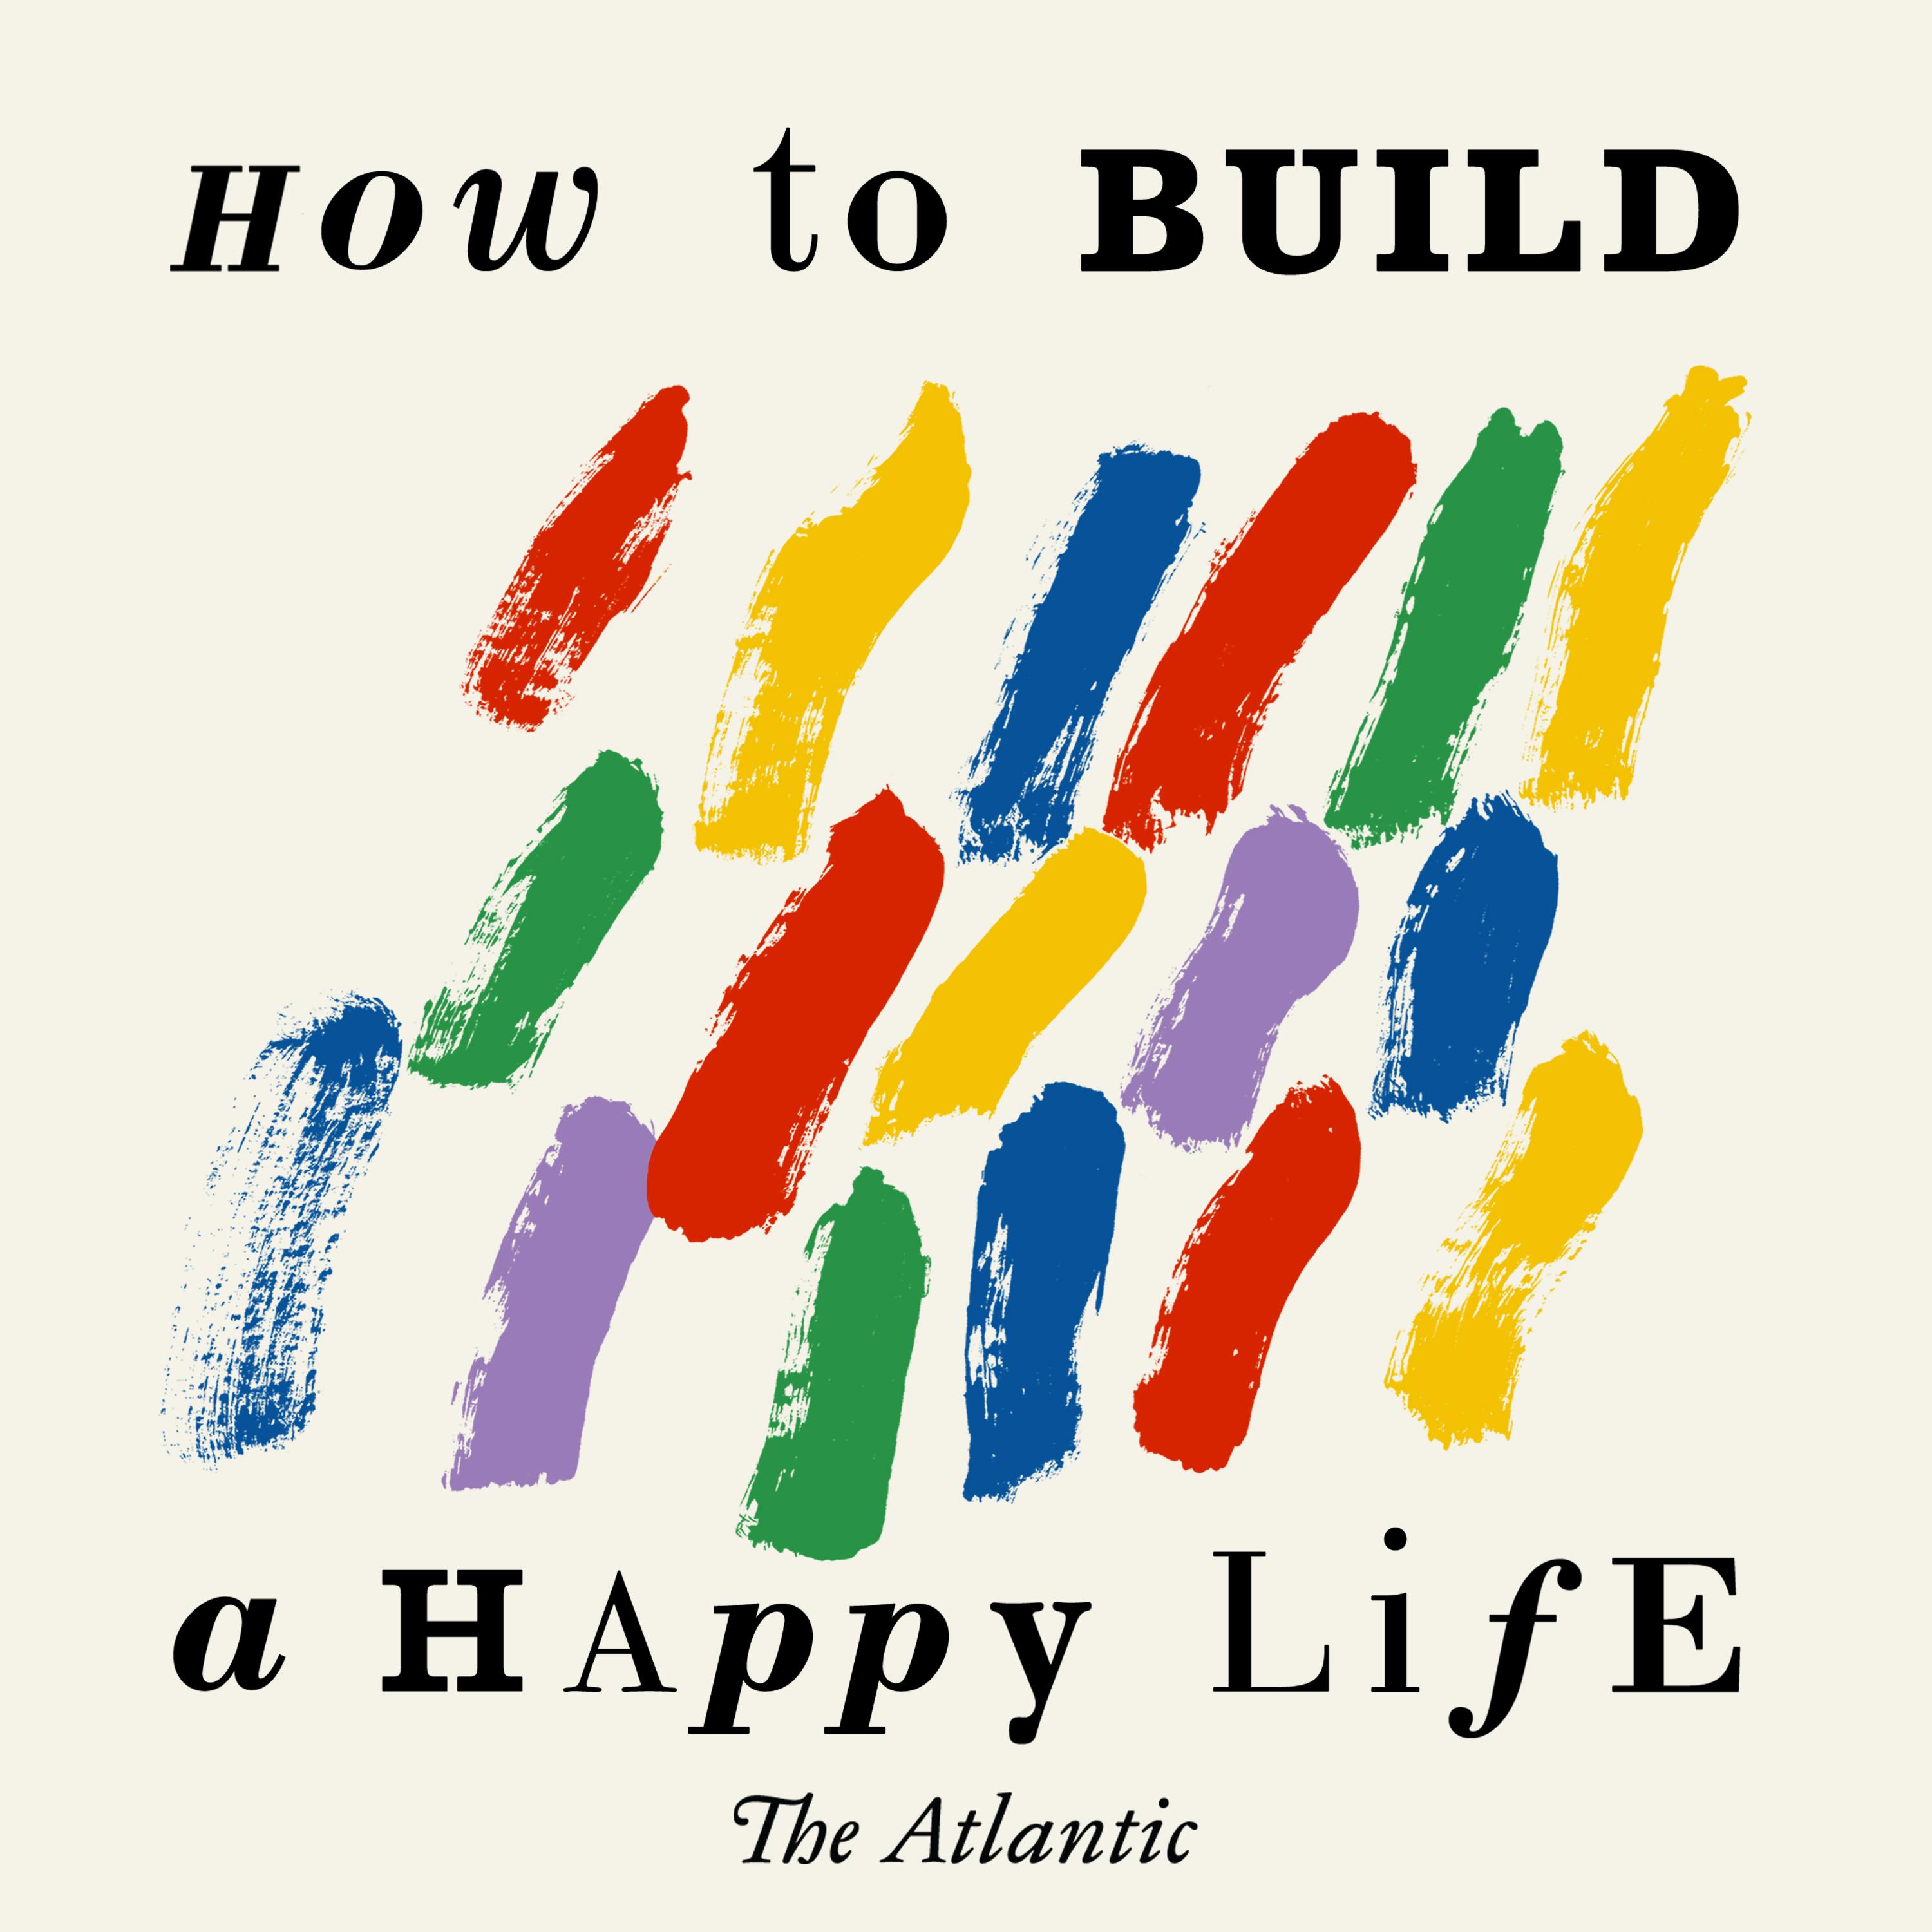 How to Build a Happy Life: Identify What You Enjoy